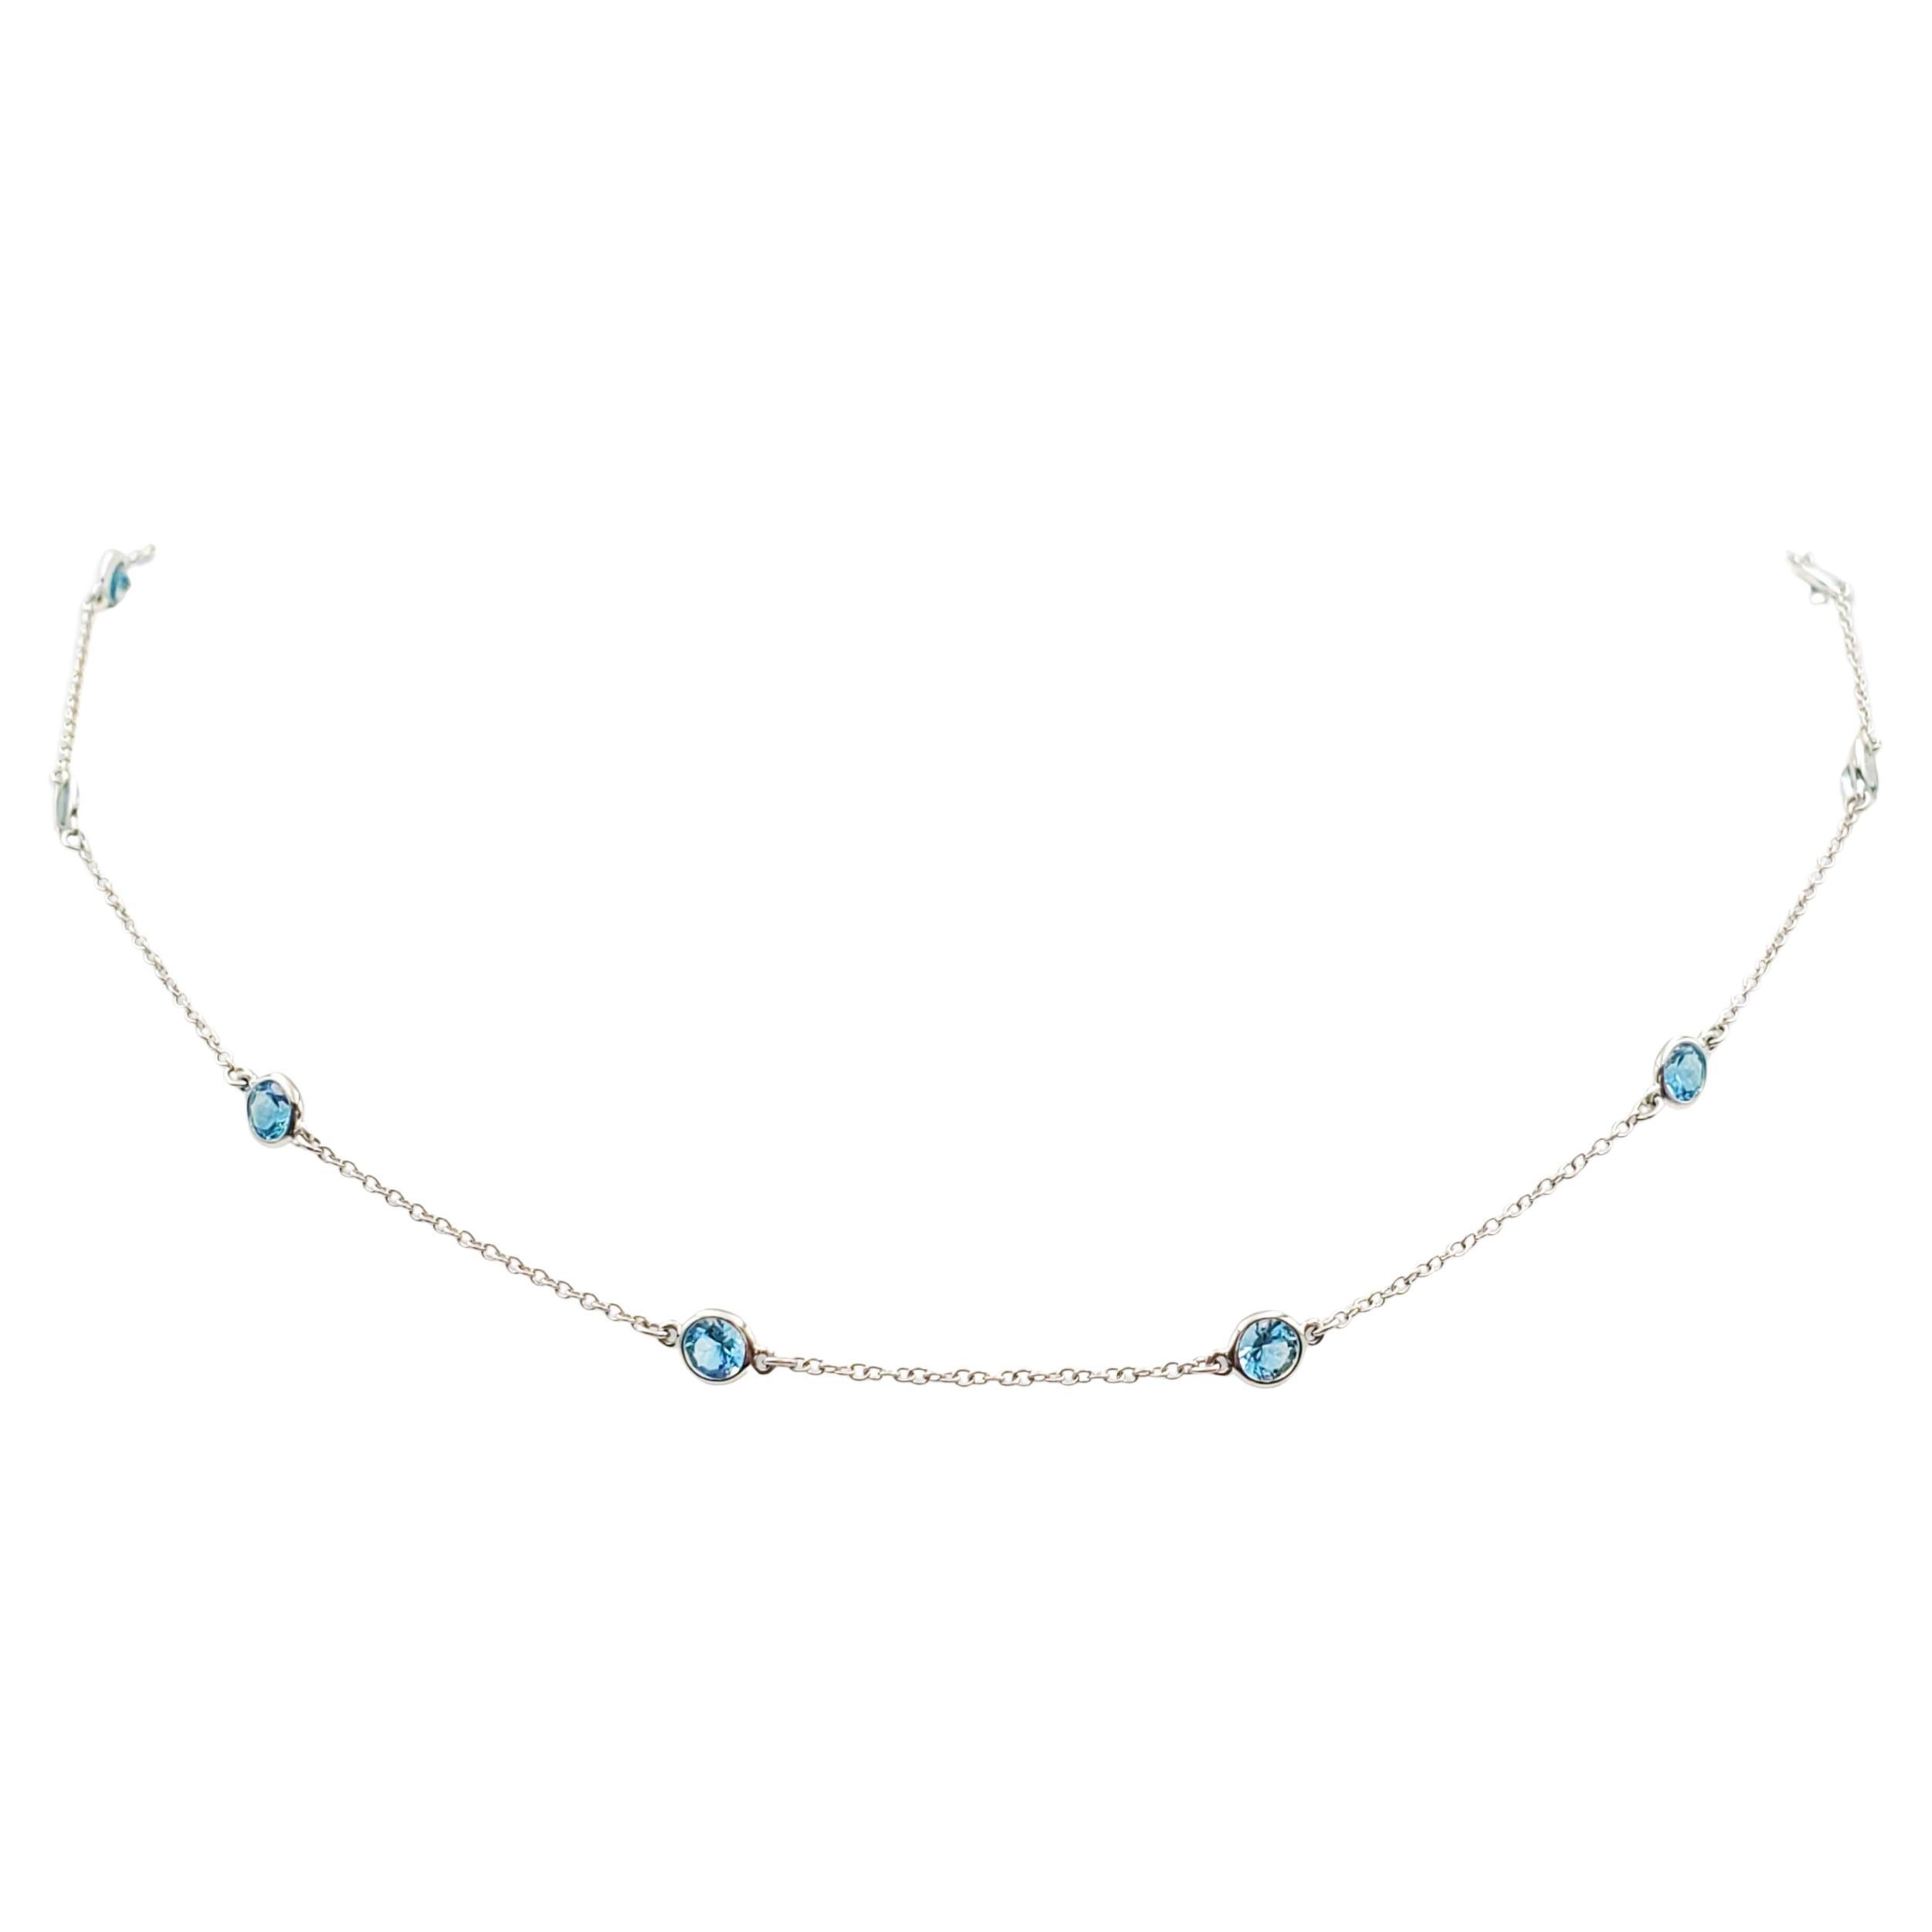 Elsa Peretti for Tiffany & Co. 'Color by the Yard' Aquamarine Necklace